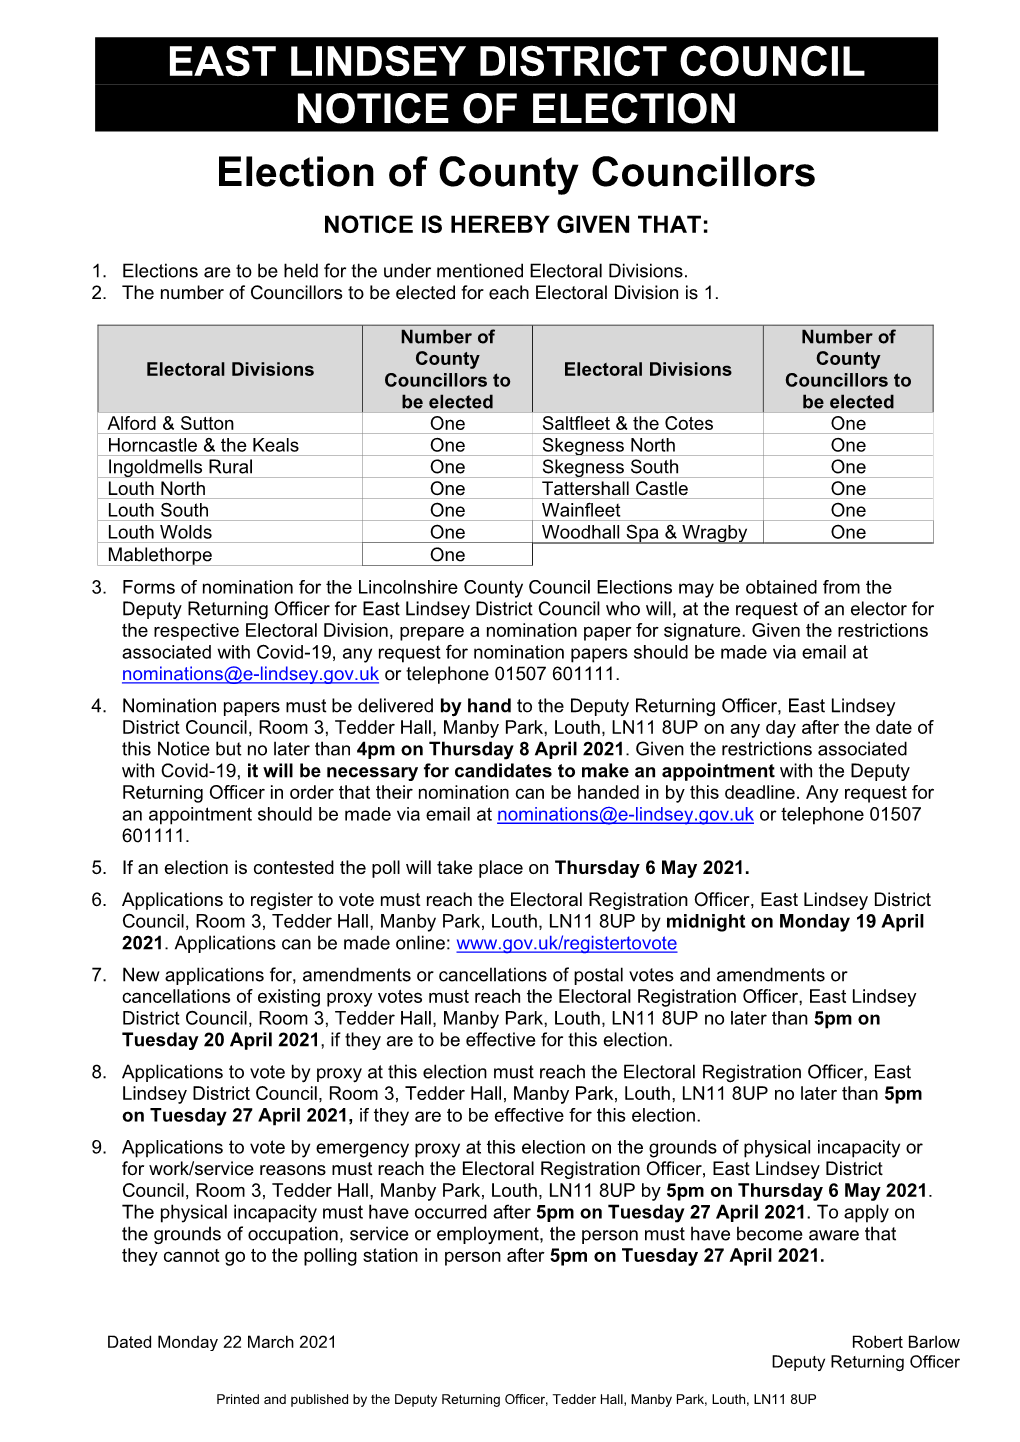 EAST LINDSEY DISTRICT COUNCIL NOTICE of ELECTION Election Of